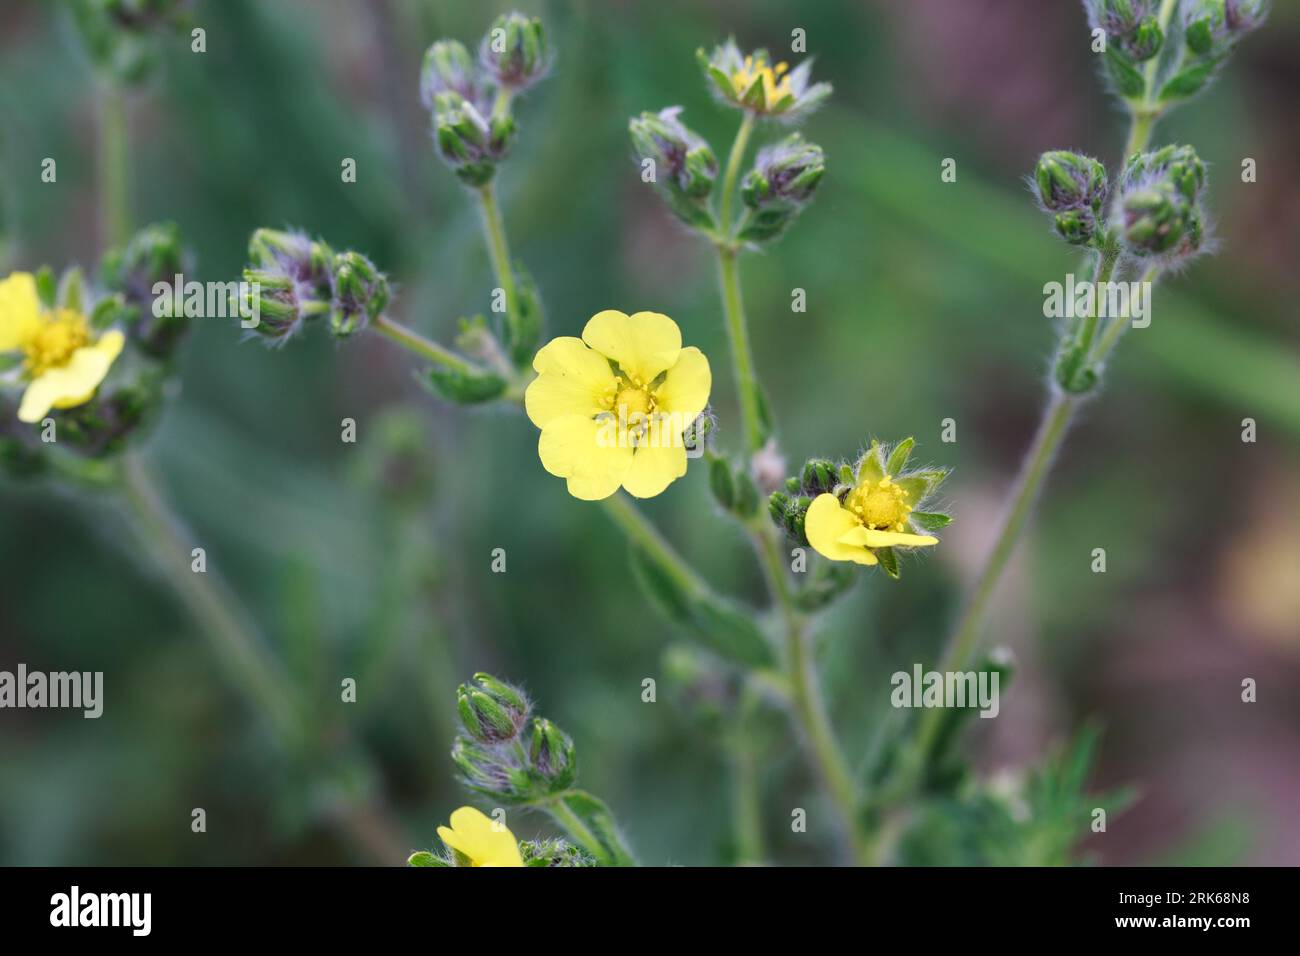 Silvery cinquefoil, Potentilla argentea. Yellow flowers. Perennial herbaceous plant species of the genus Potentilla of the Rosaceae family. Stock Photo